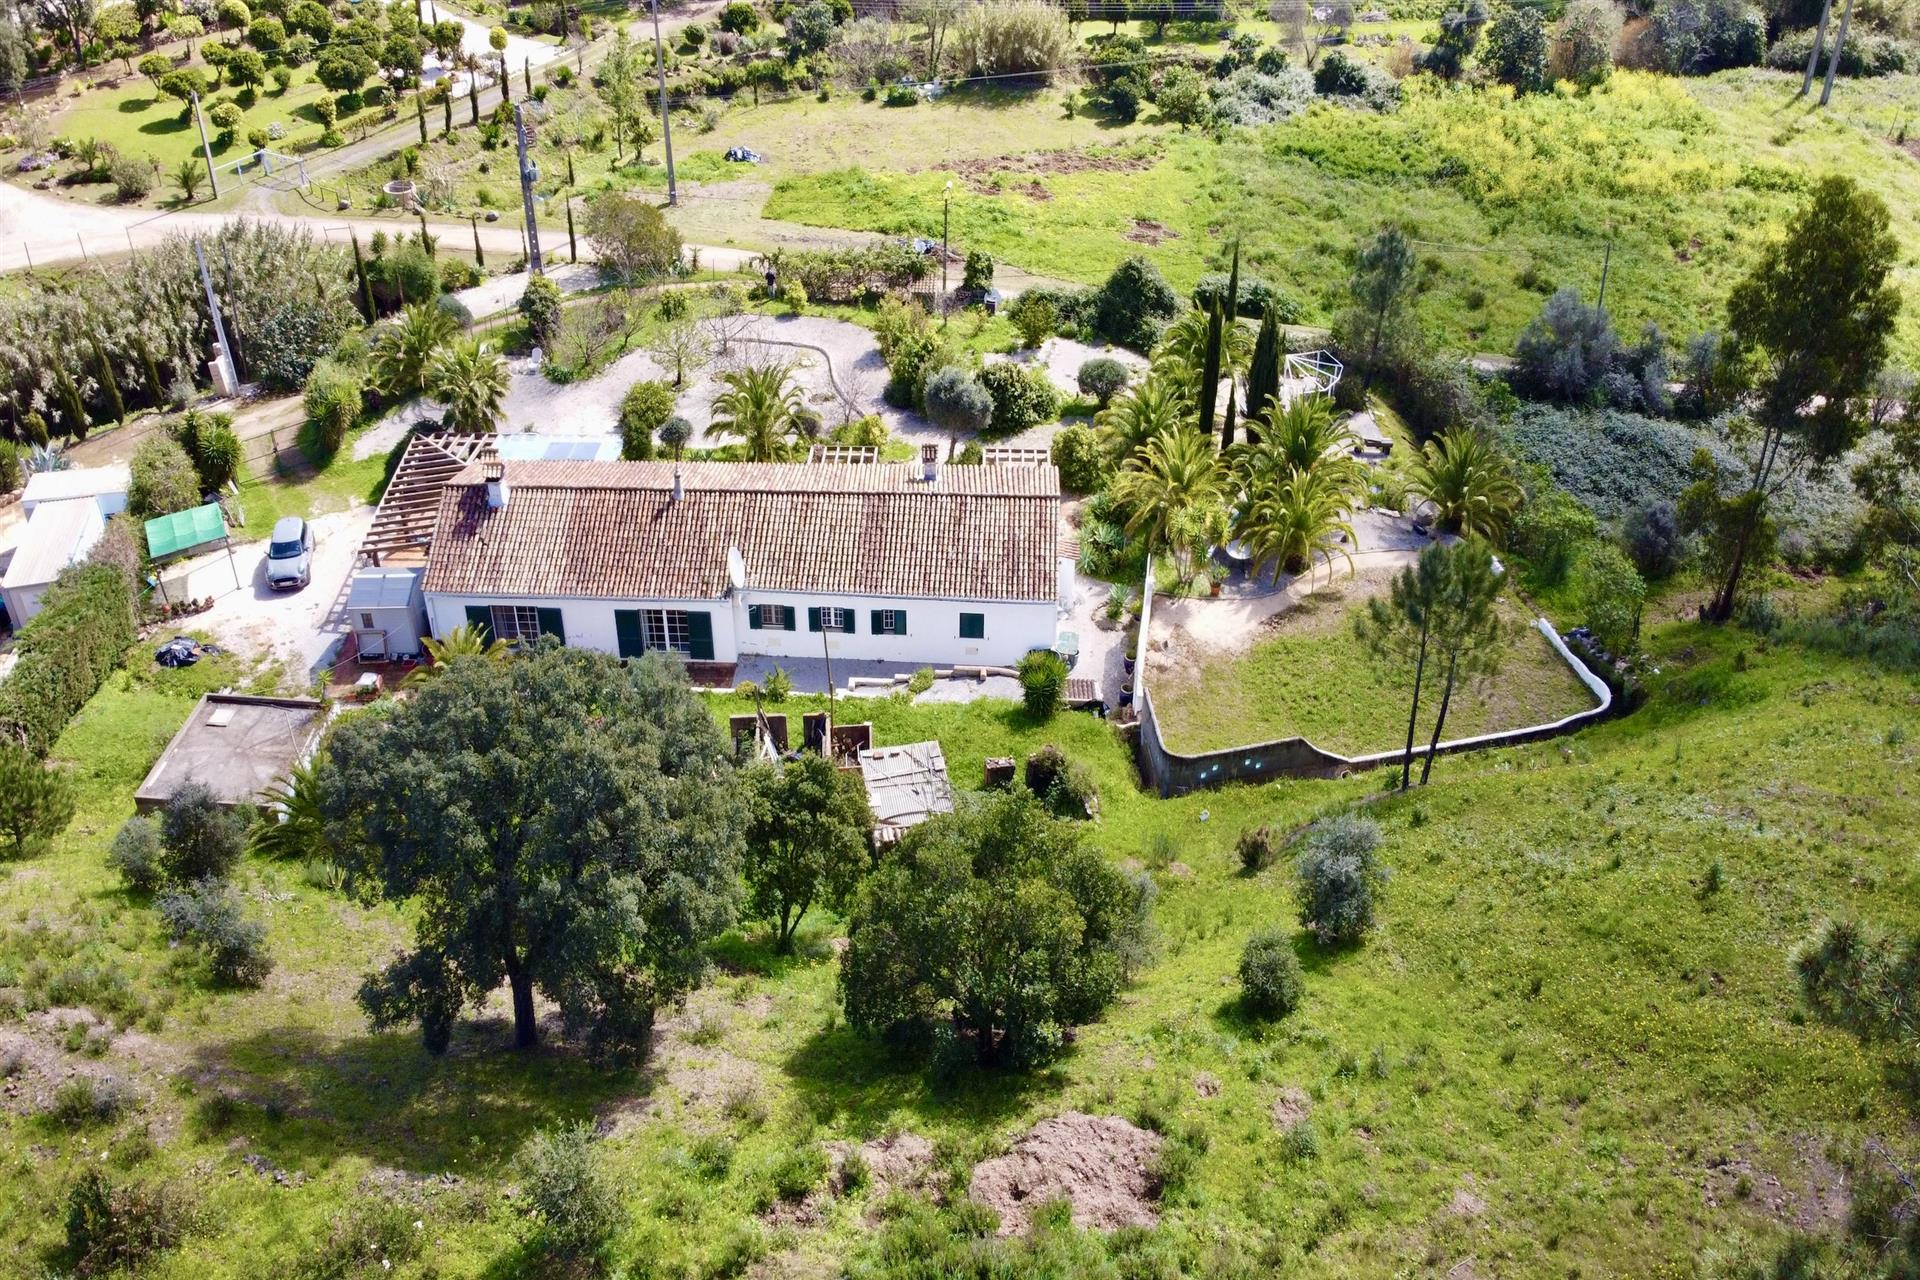 Countryside Escape: Charming T4 House on 12,000 m2 of Land